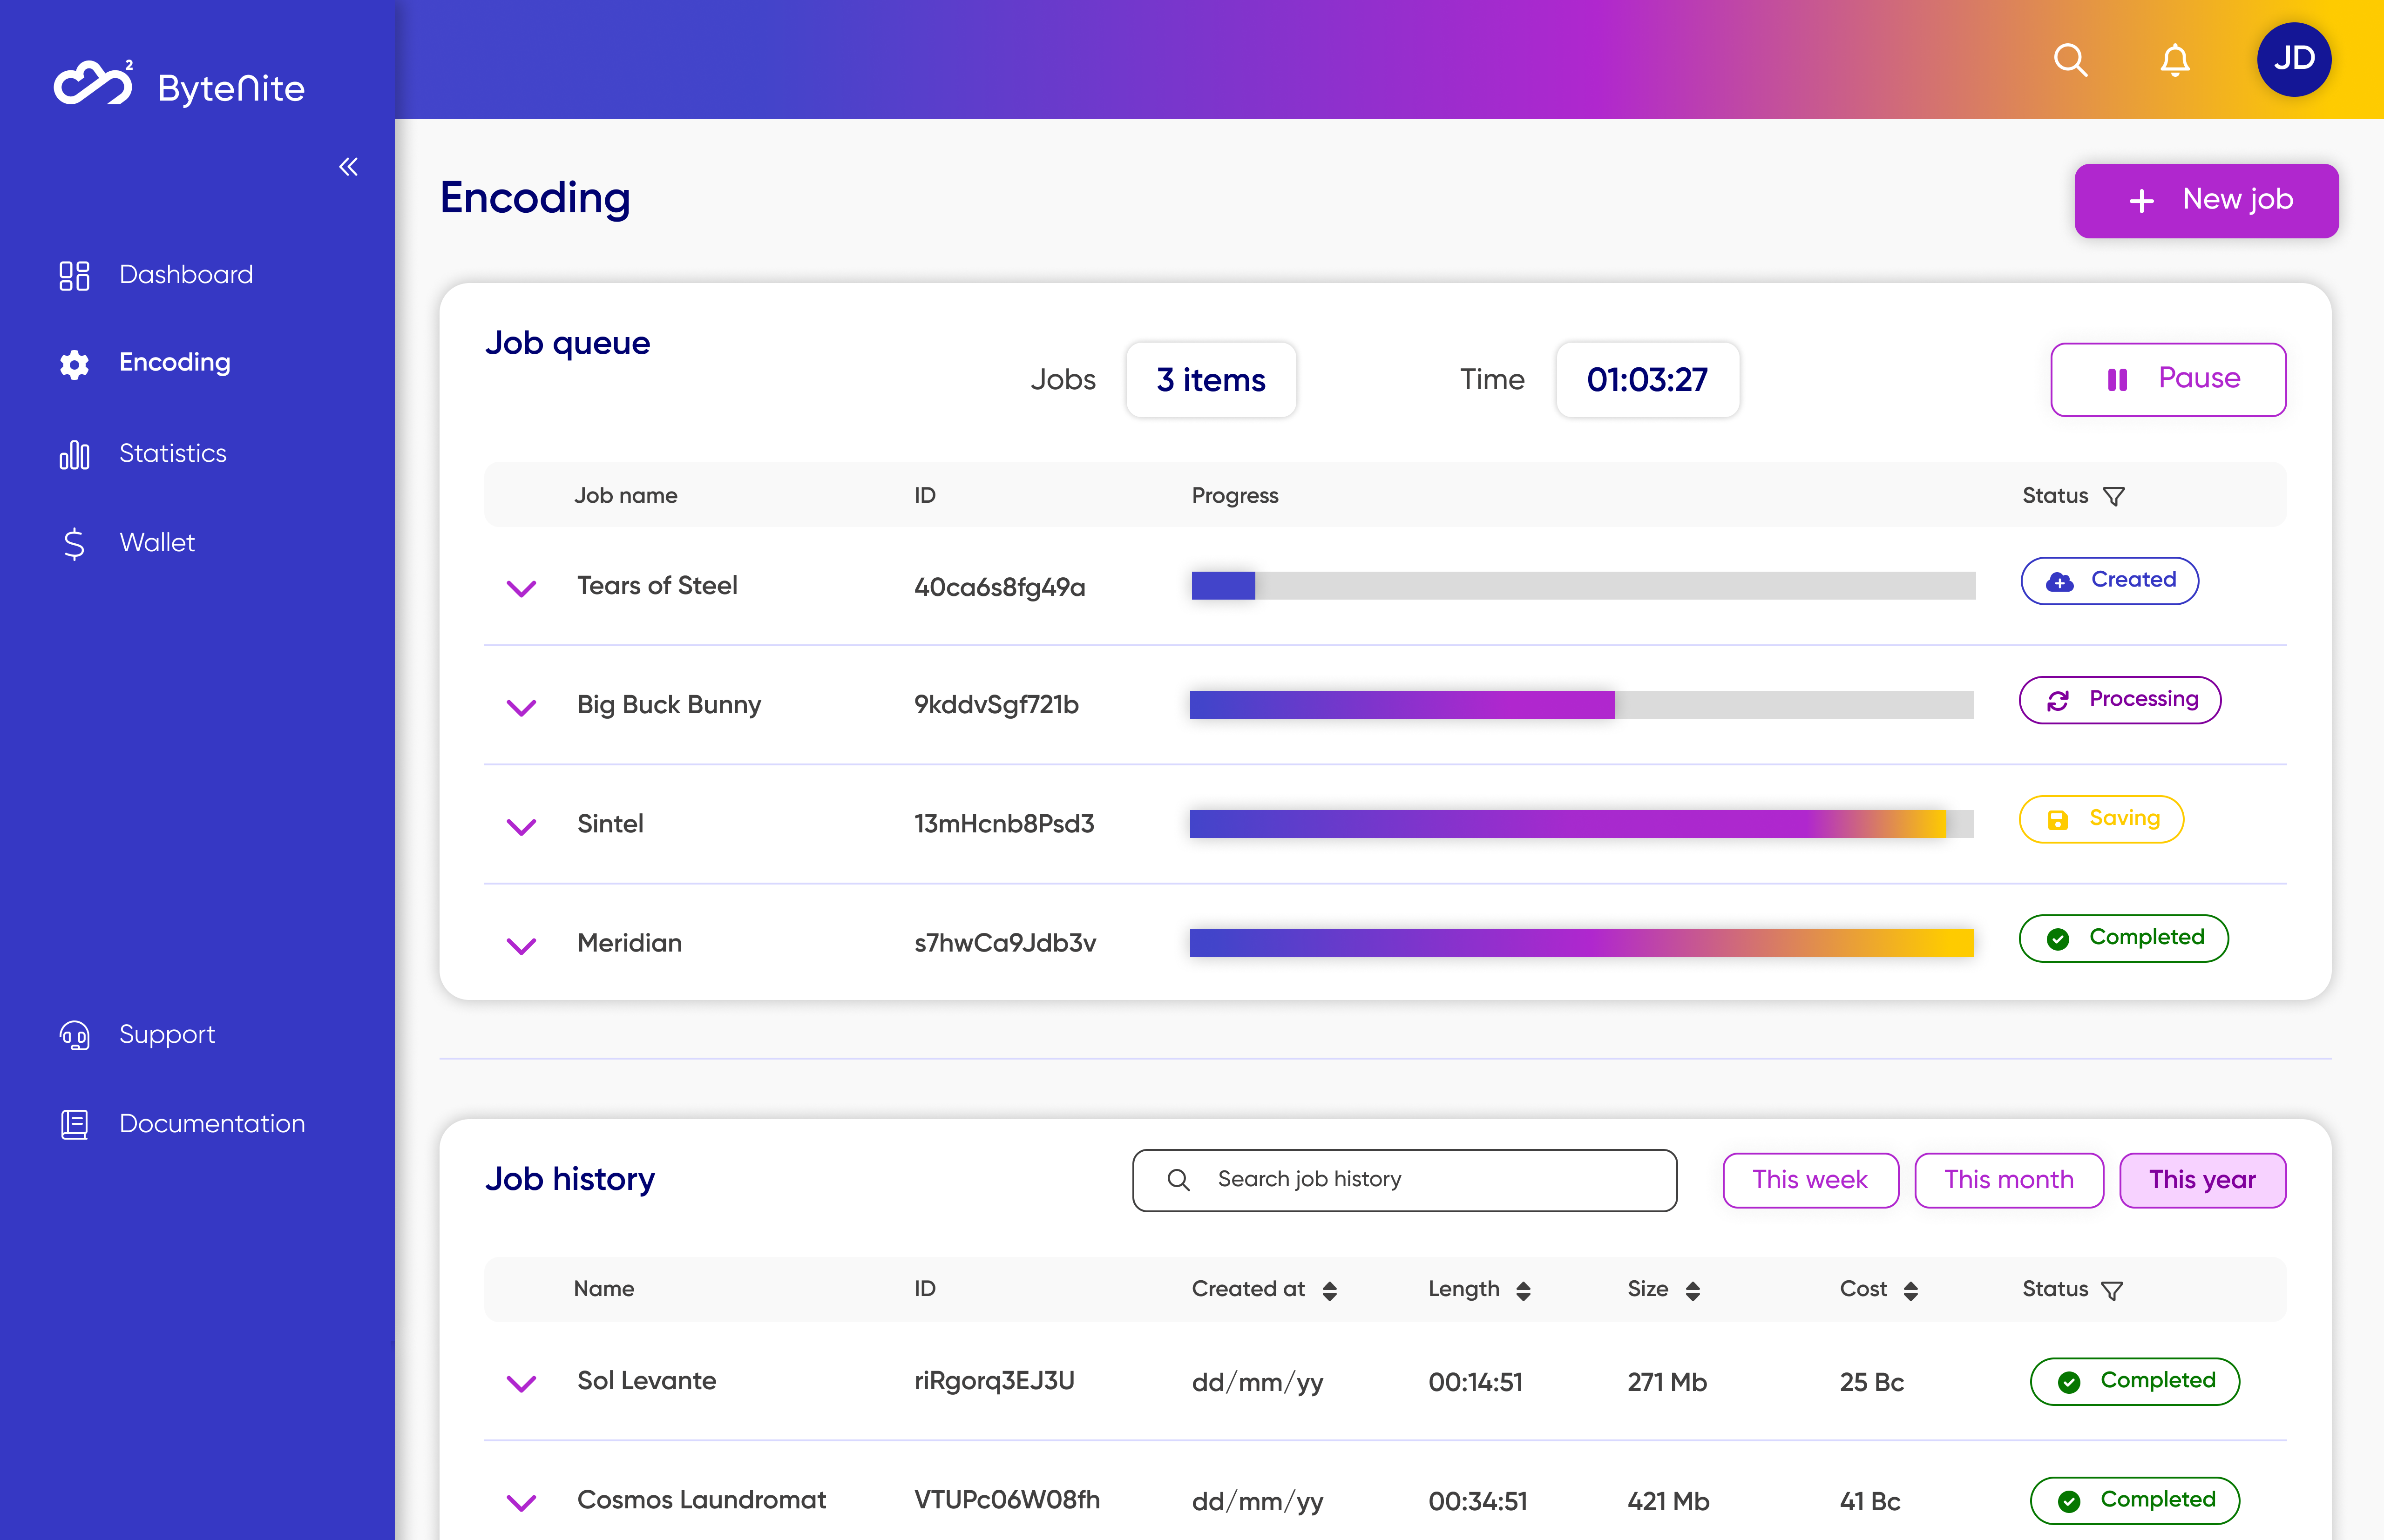 Encoding Page - Monitor and manage your job queue and your past jobs.